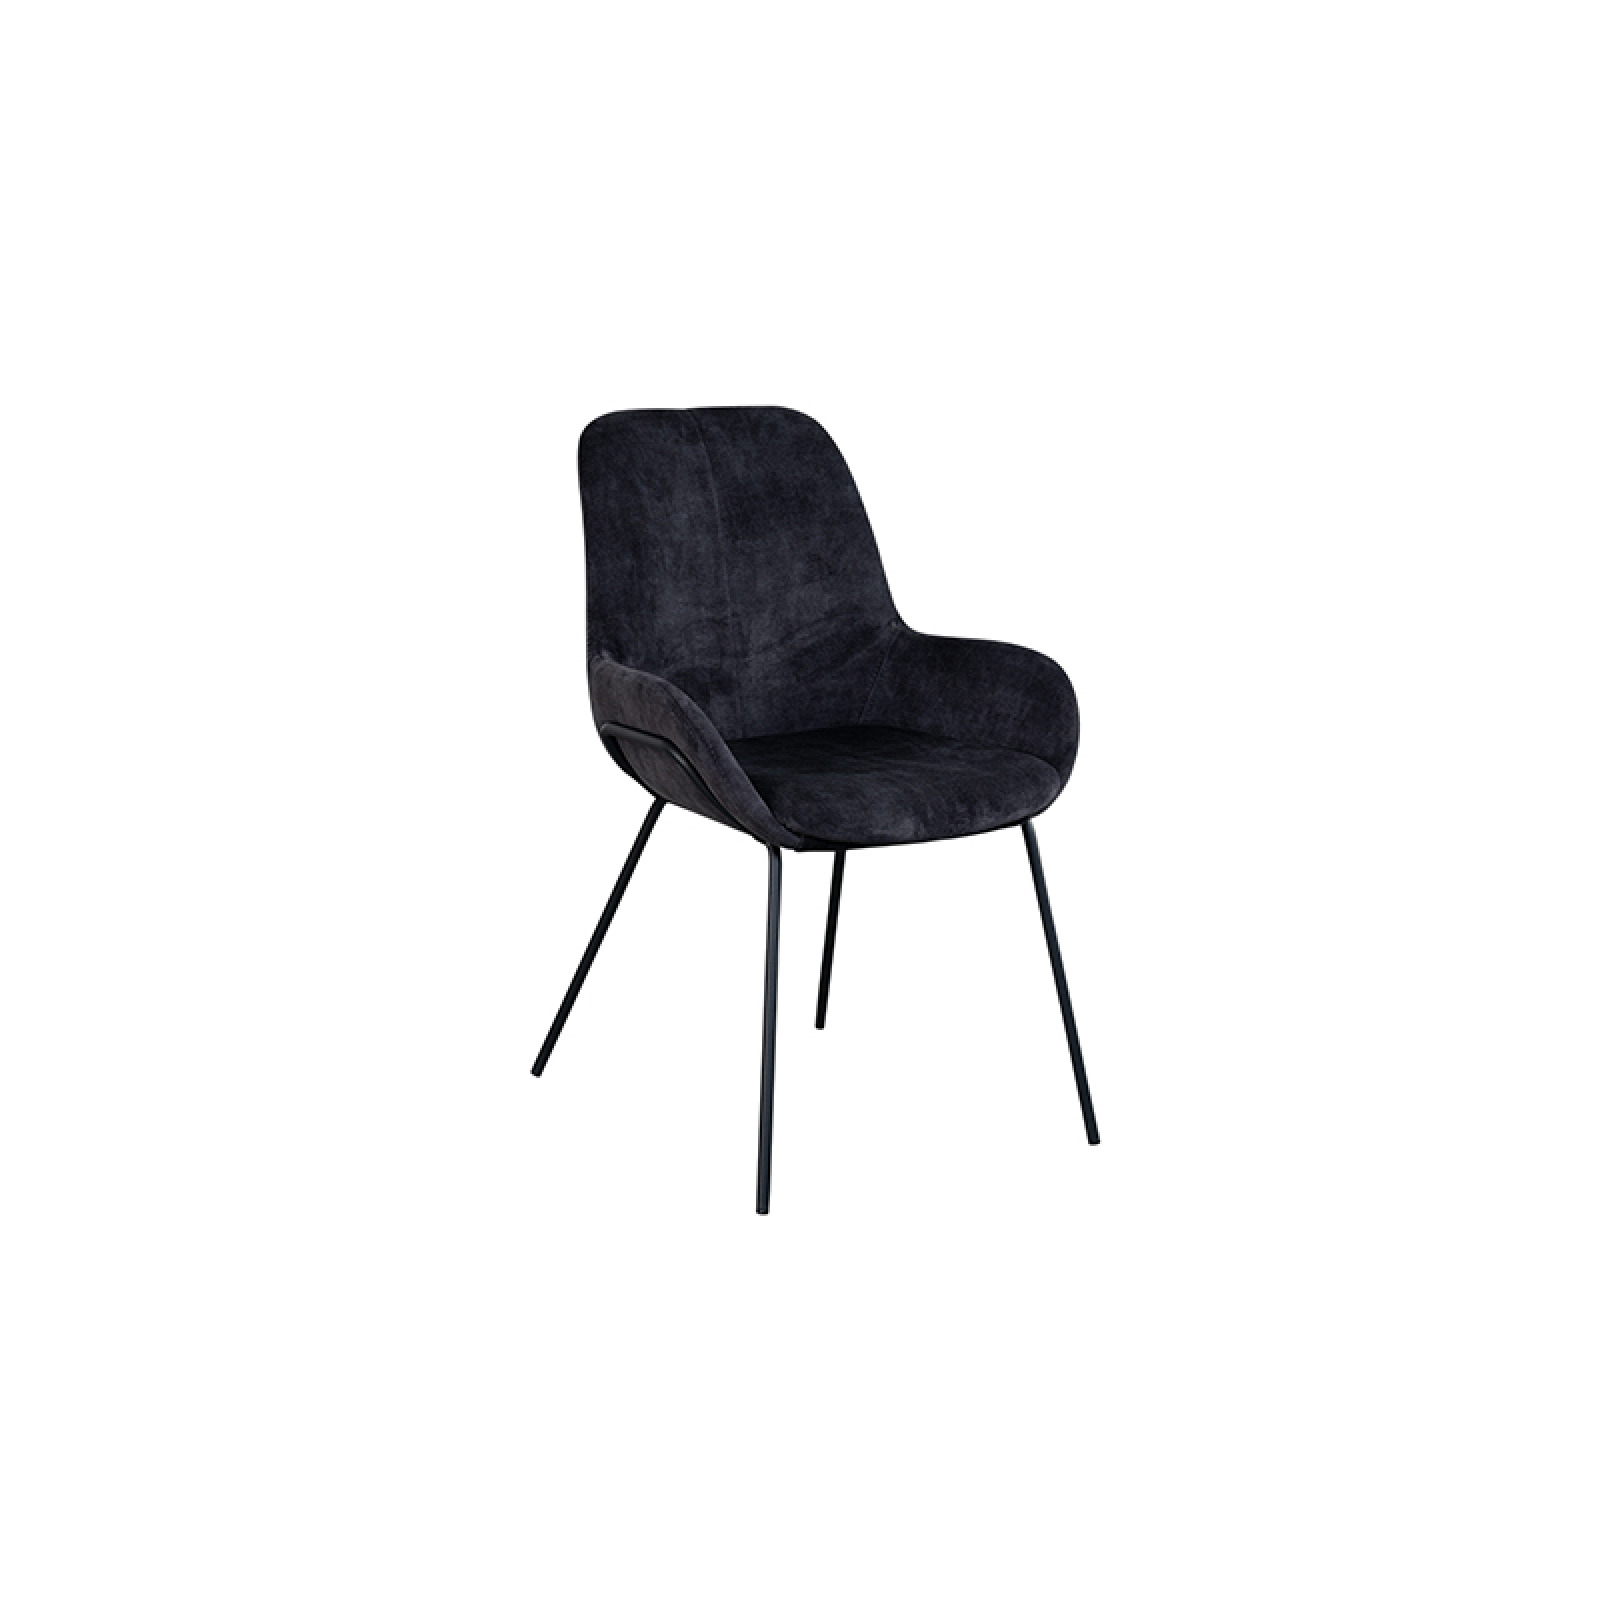 Livingston anthracite chair